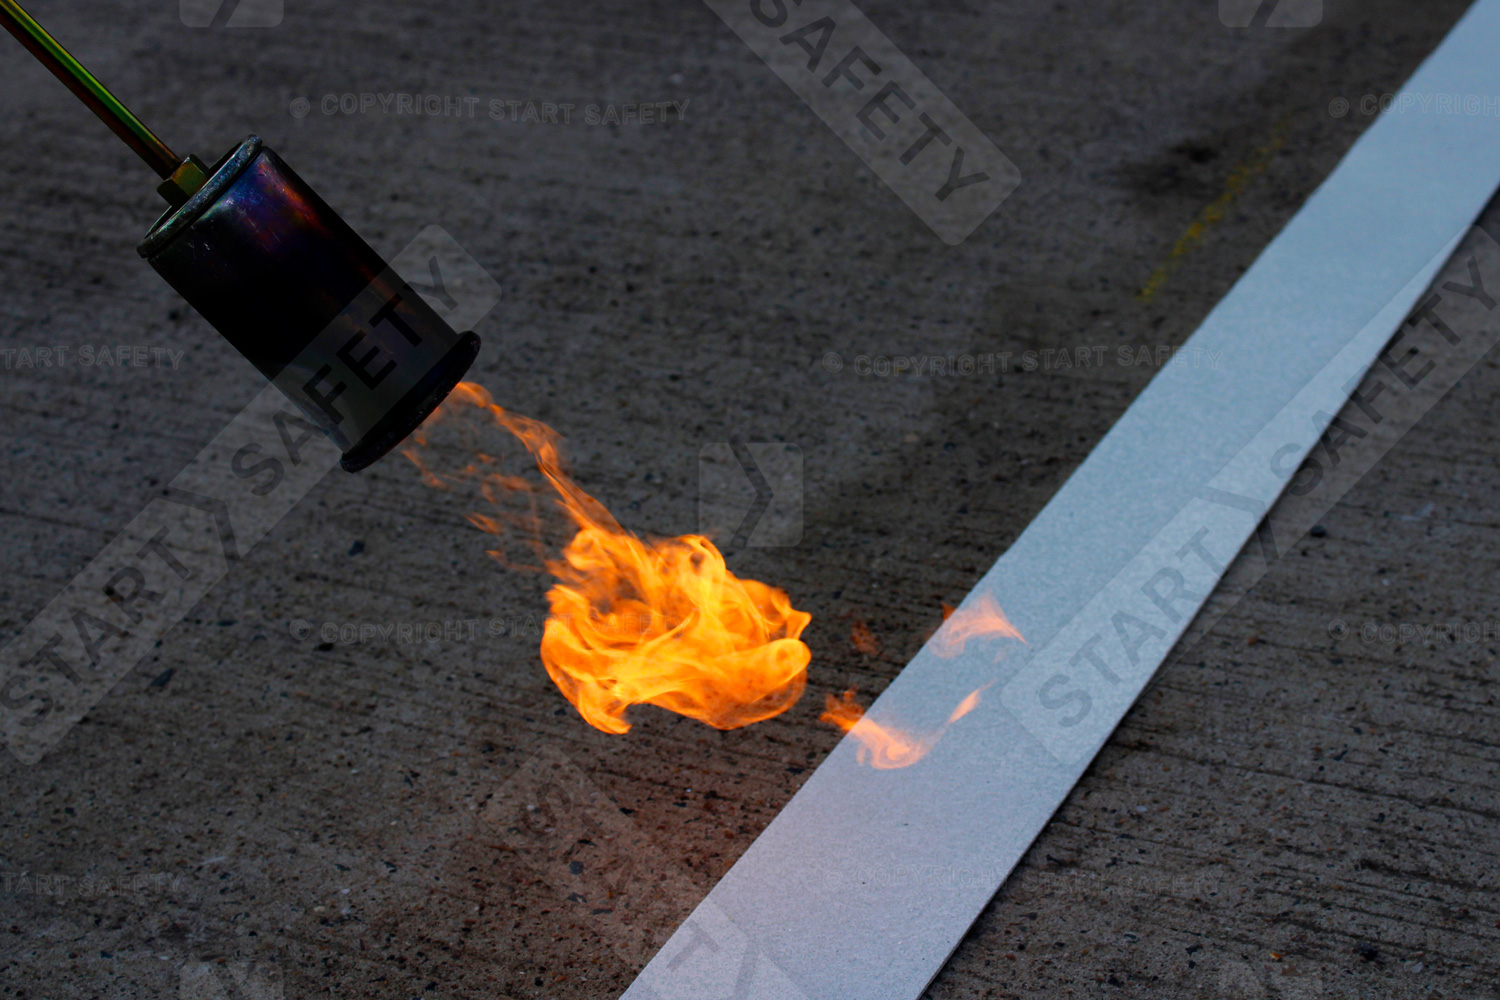 Thermoplastic Marking being installed with gas burner.